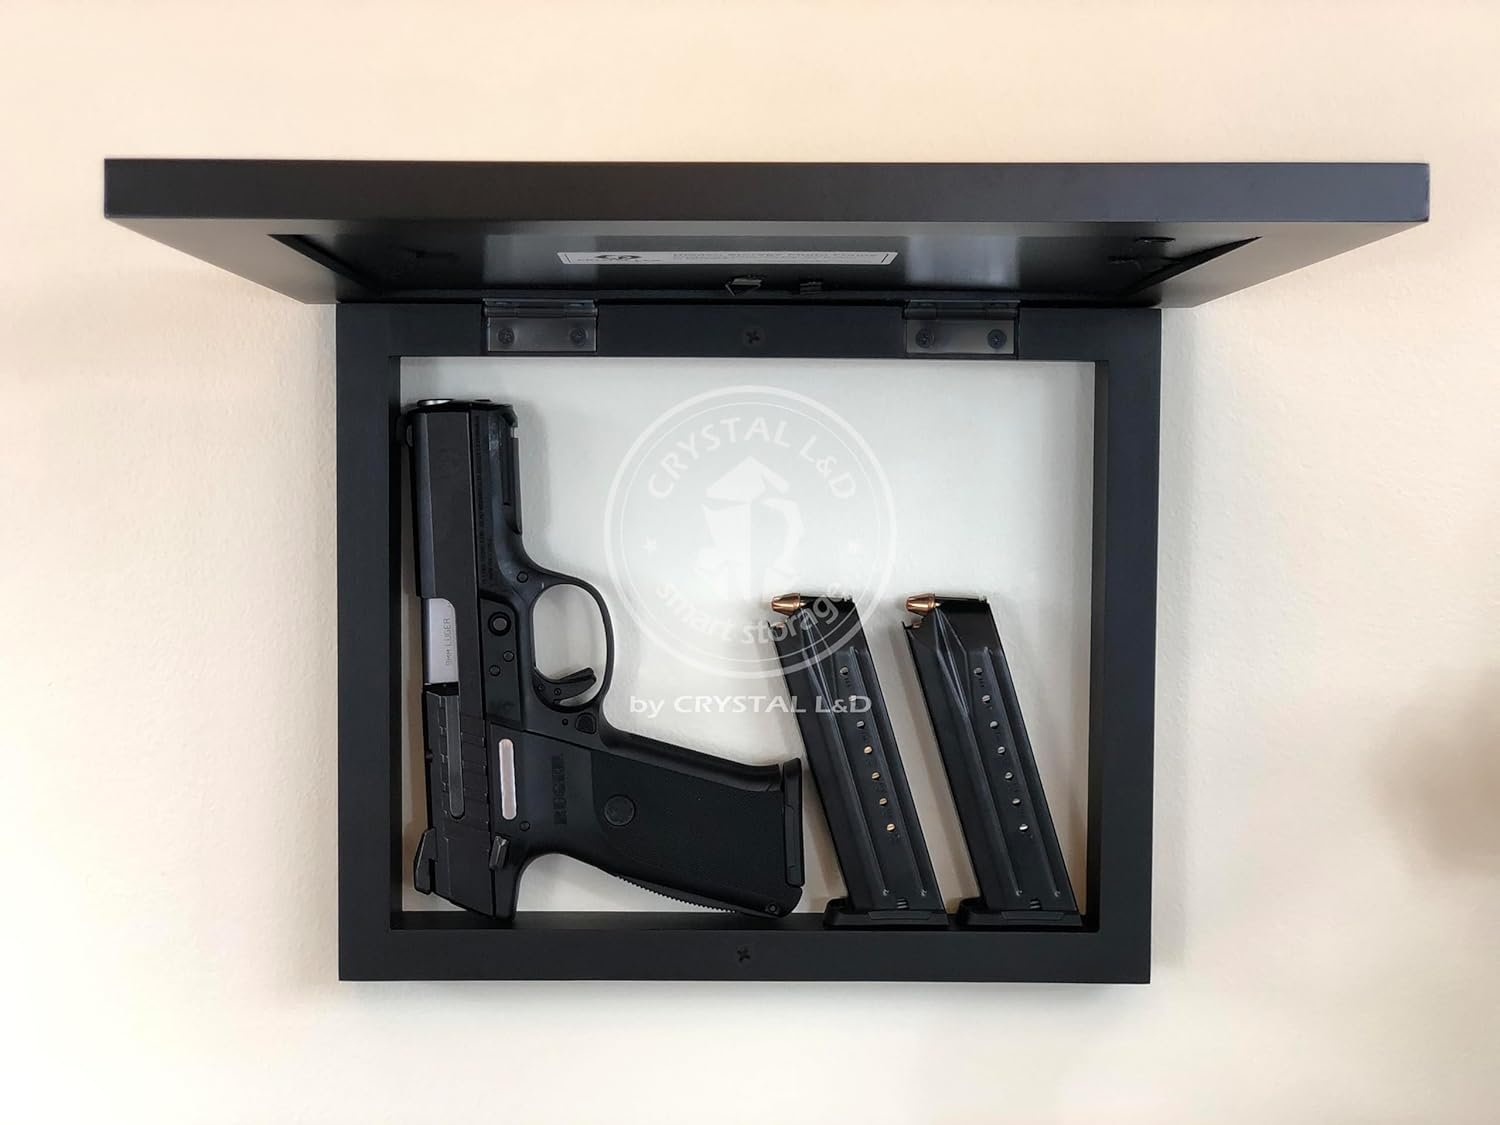 Hidden Storage Photo Frame for Gun and Valuables Review